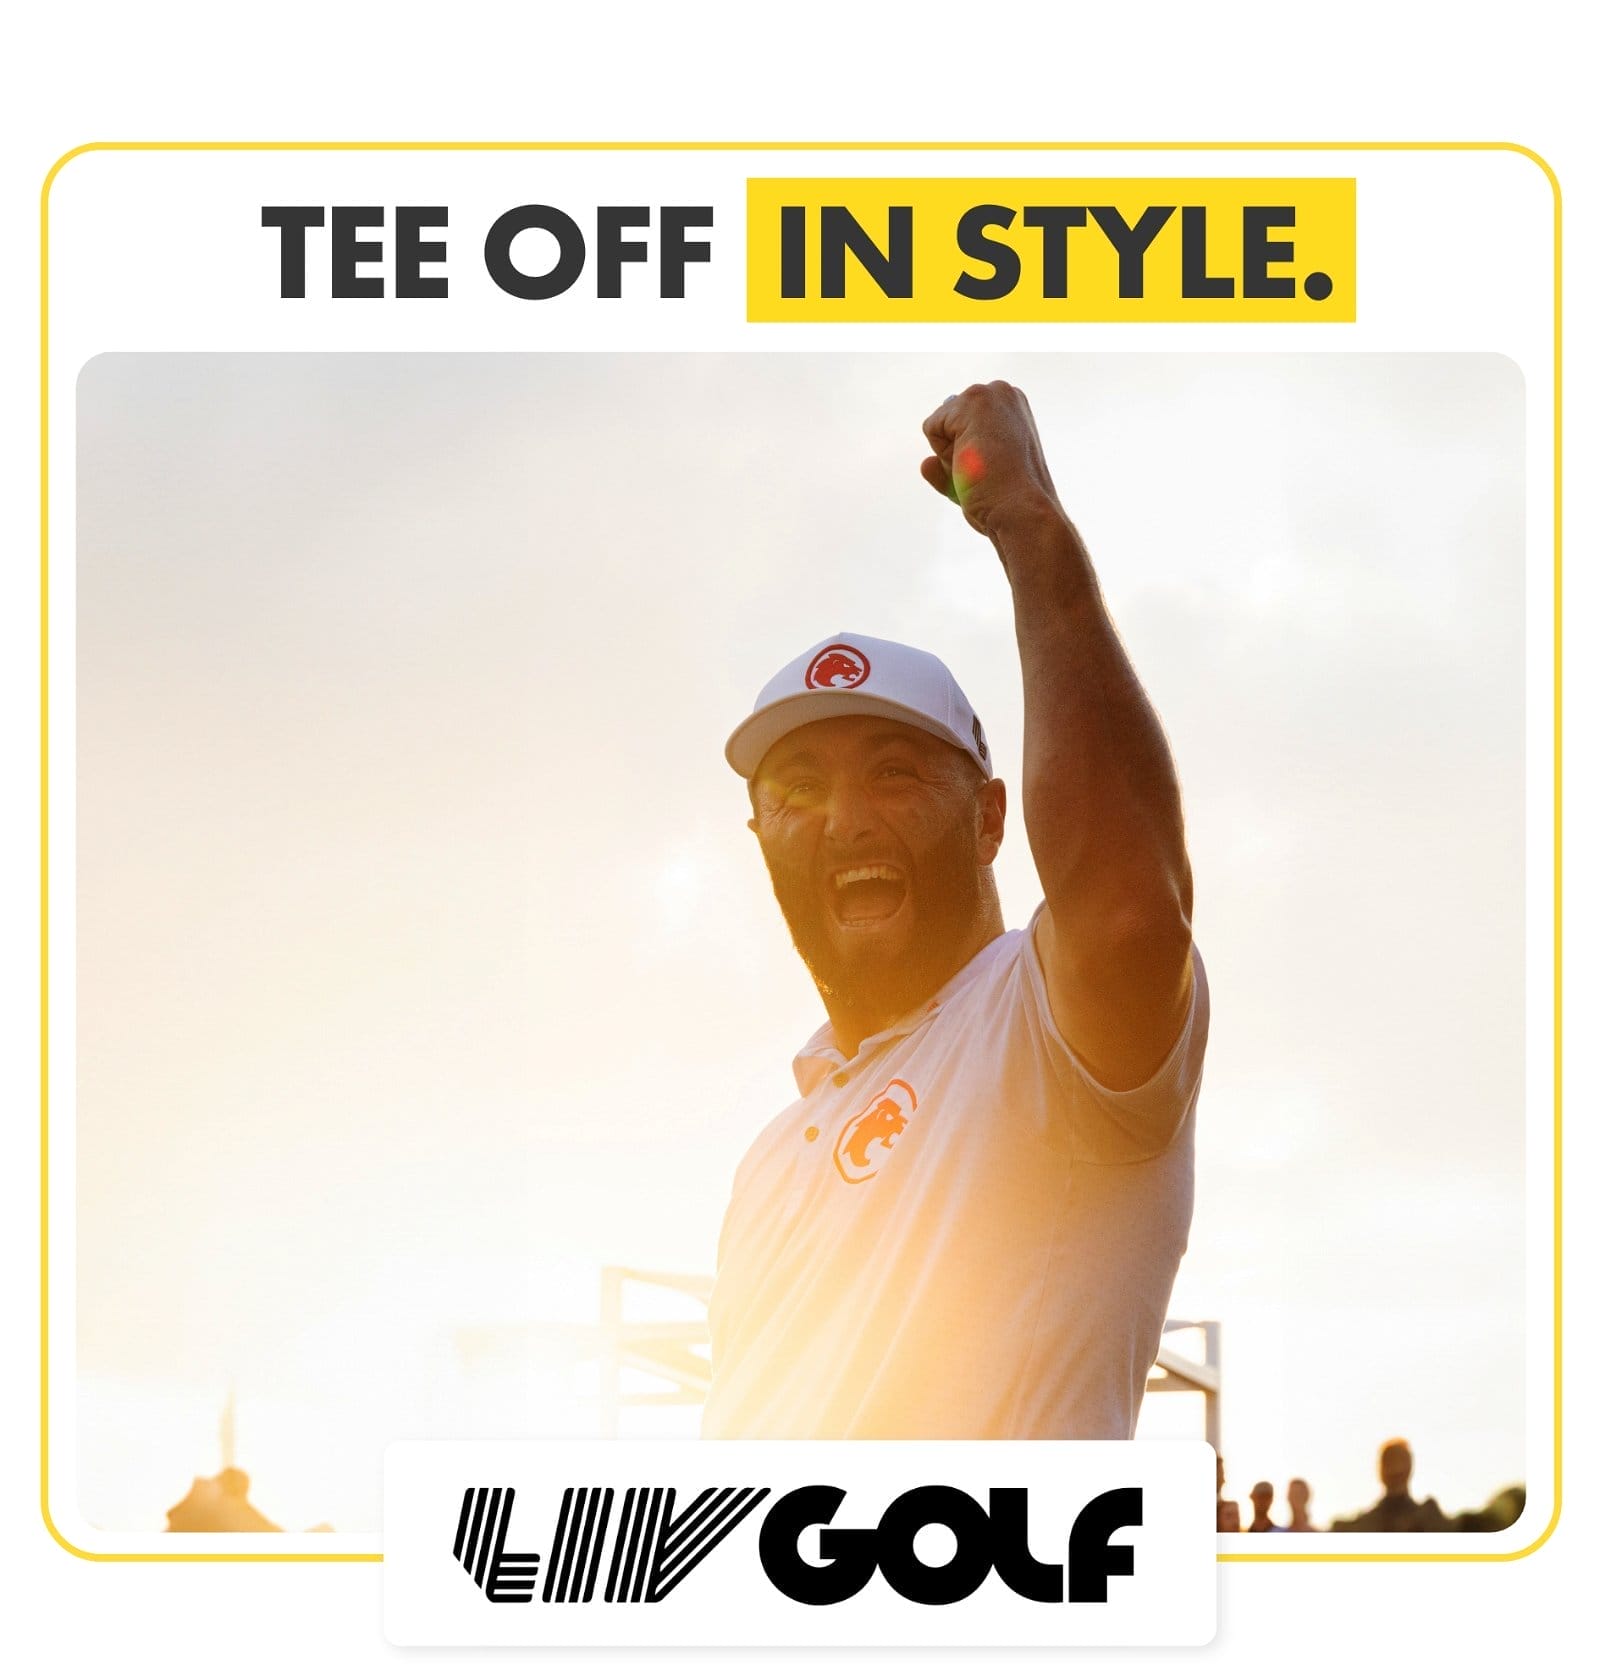 TEE OFF IN STYLE. LIV GOLF.